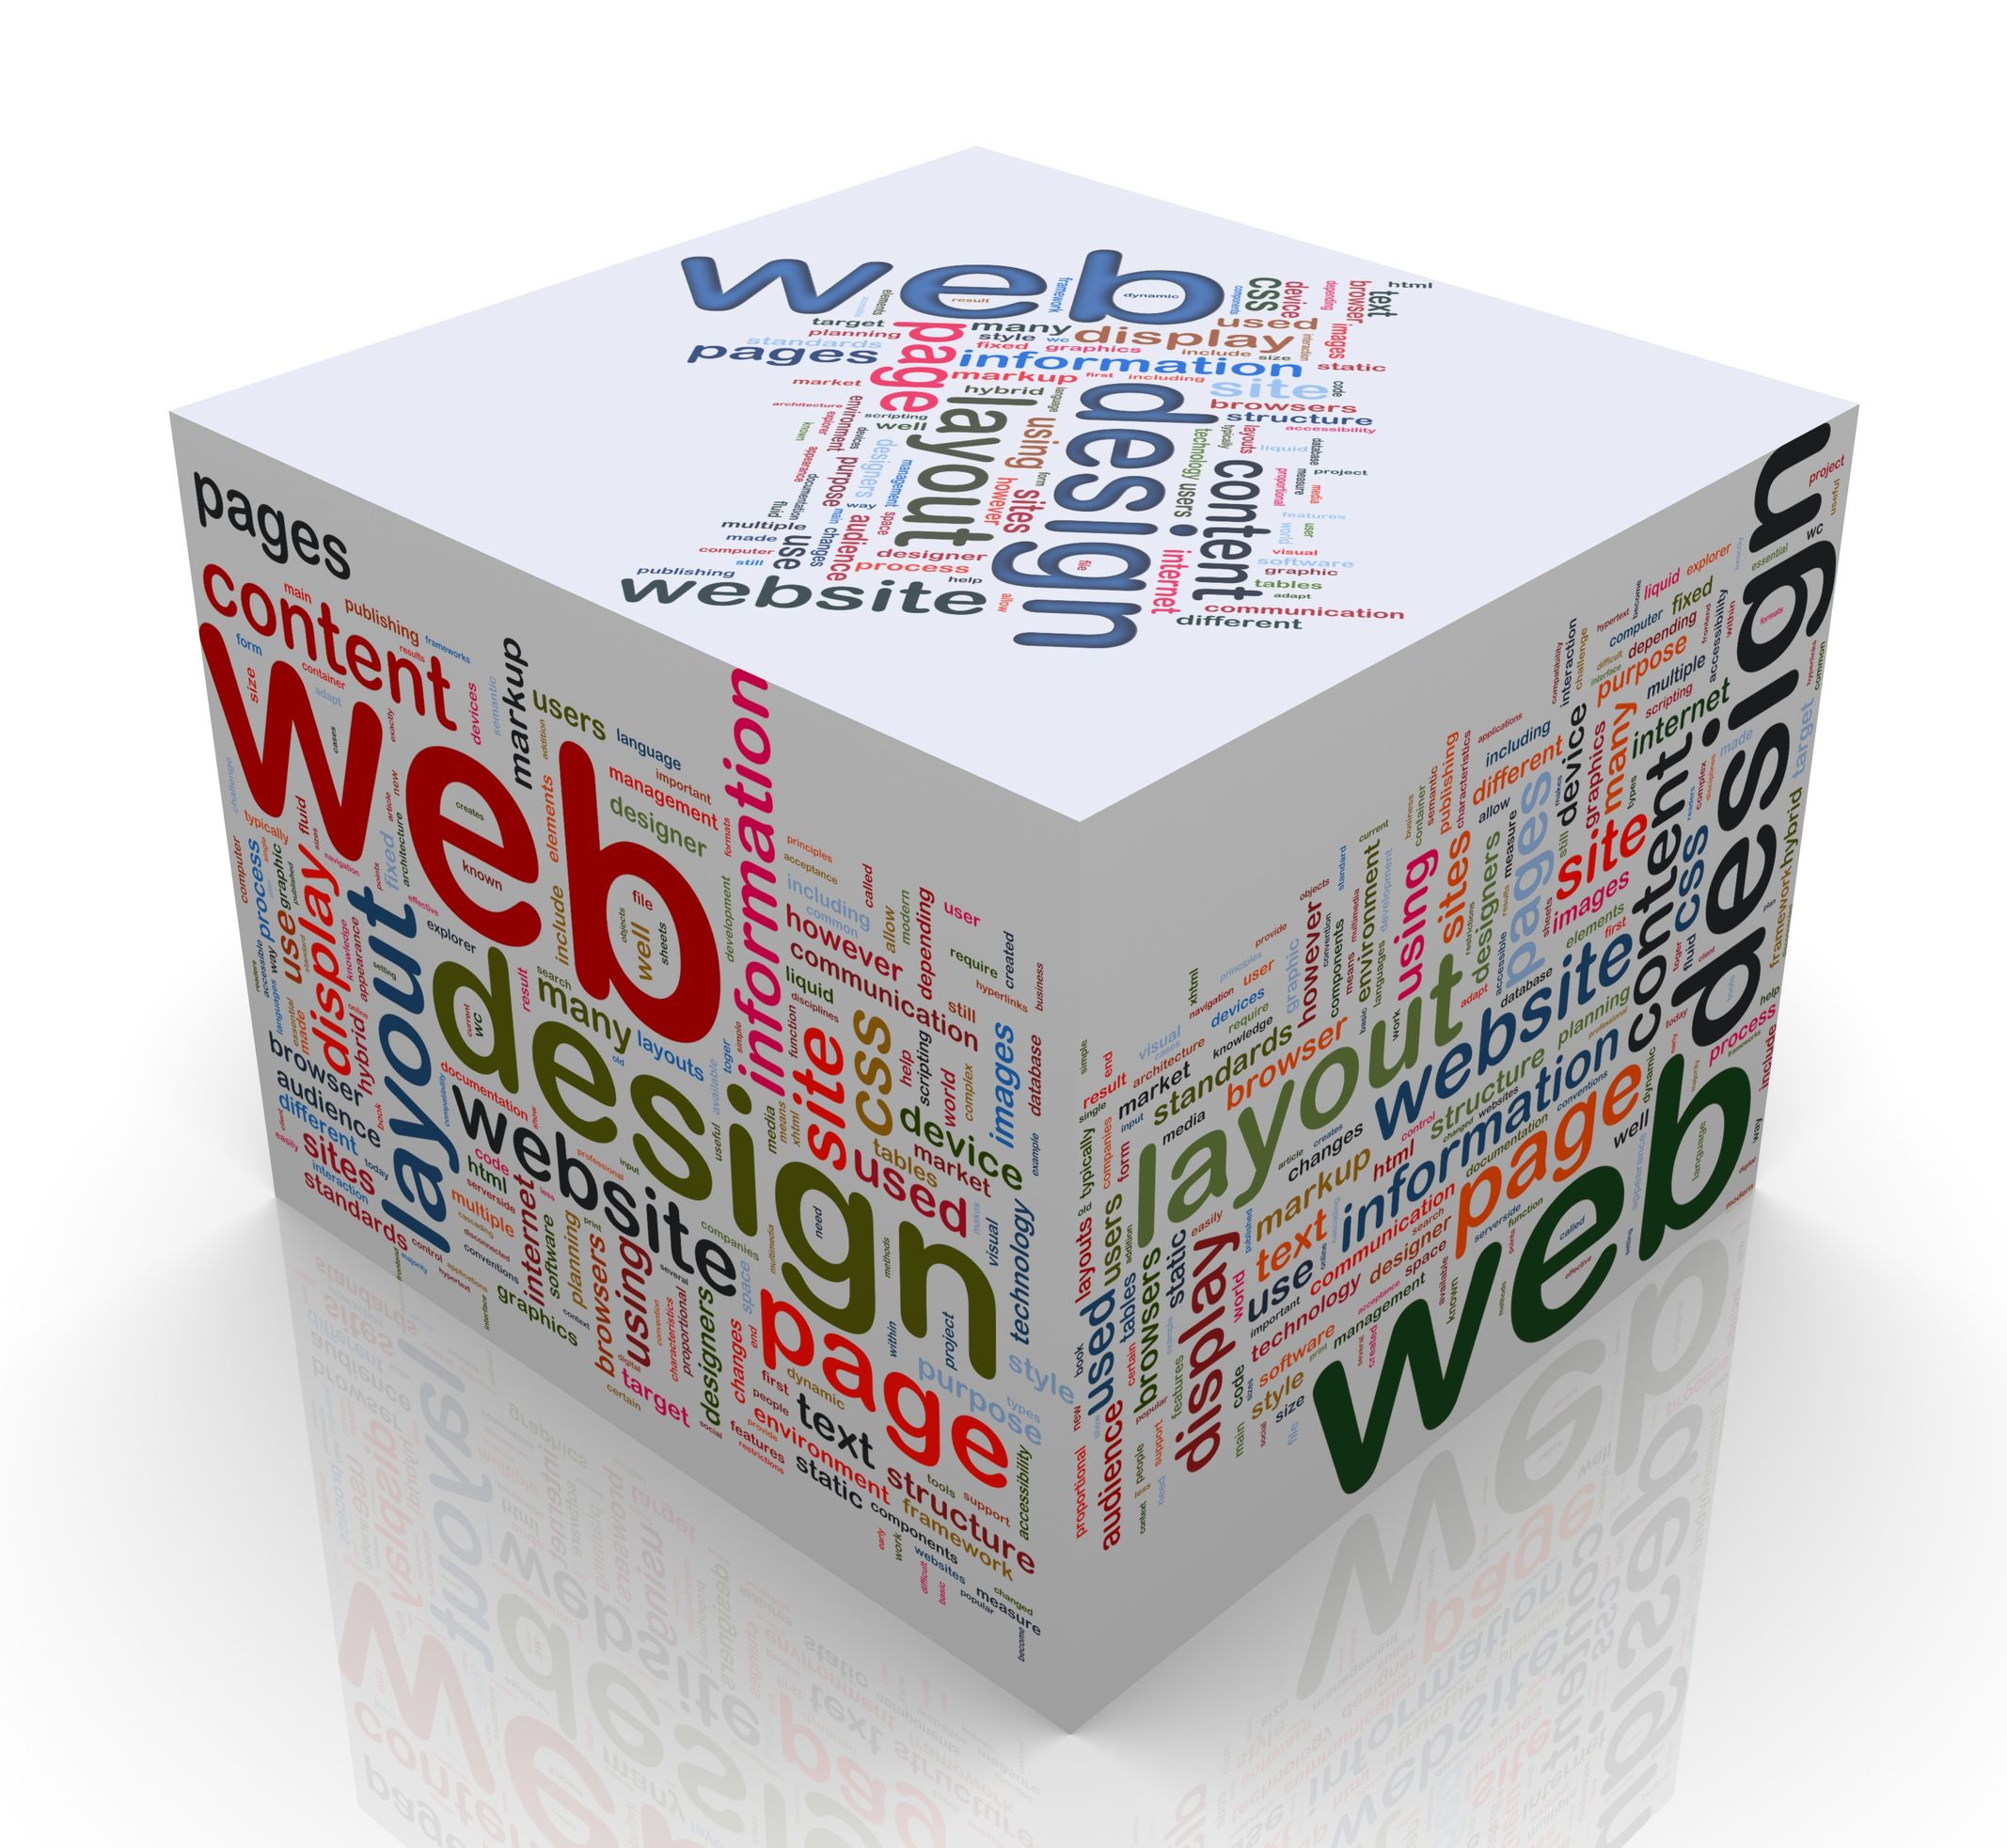 Hiring a Dependable Web Development Company in Bossier City Is Crucial